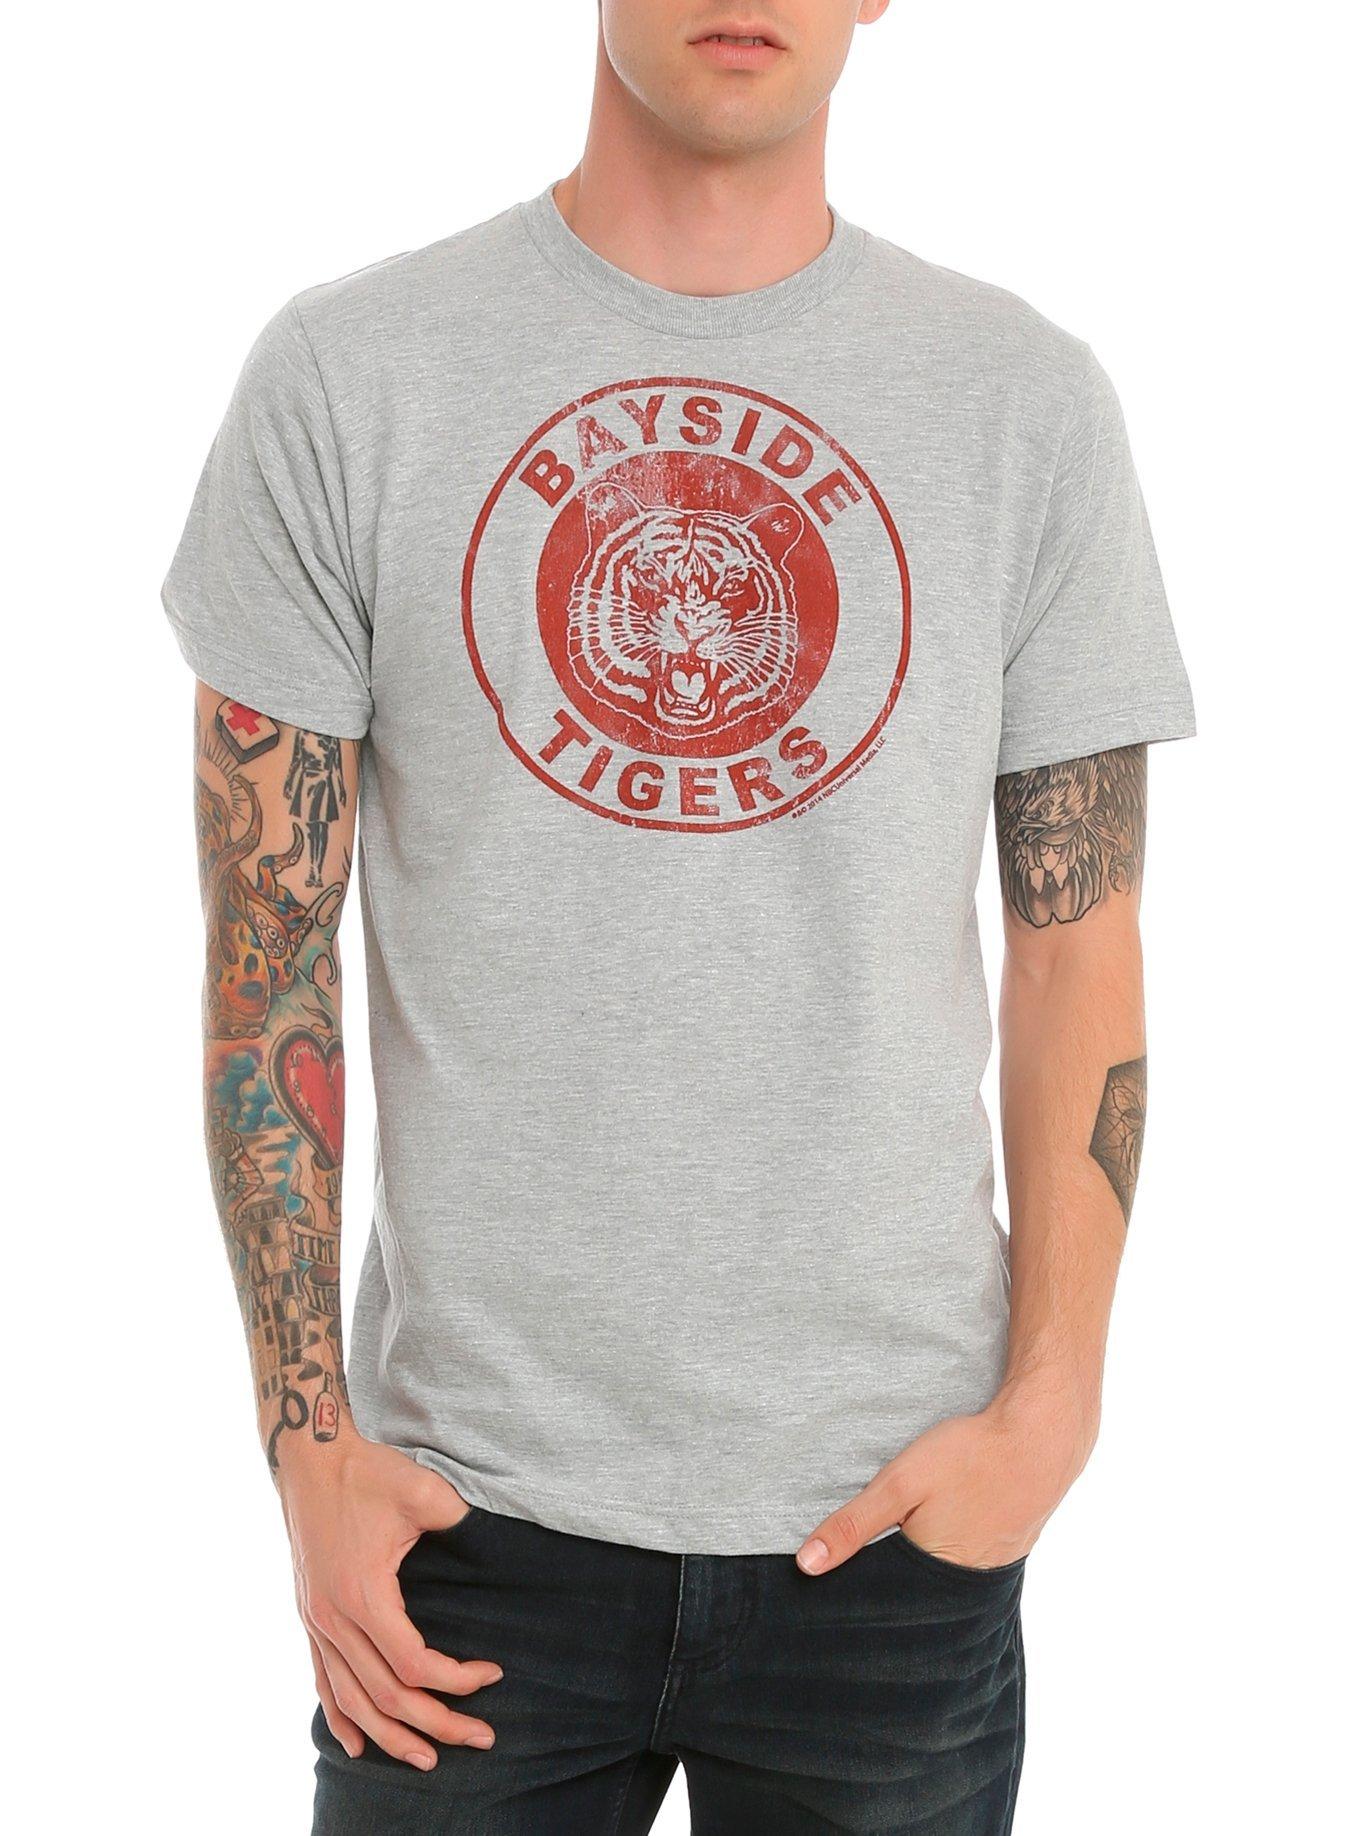 Saved By The Bell Bayside Tigers T-Shirt, GREY, hi-res